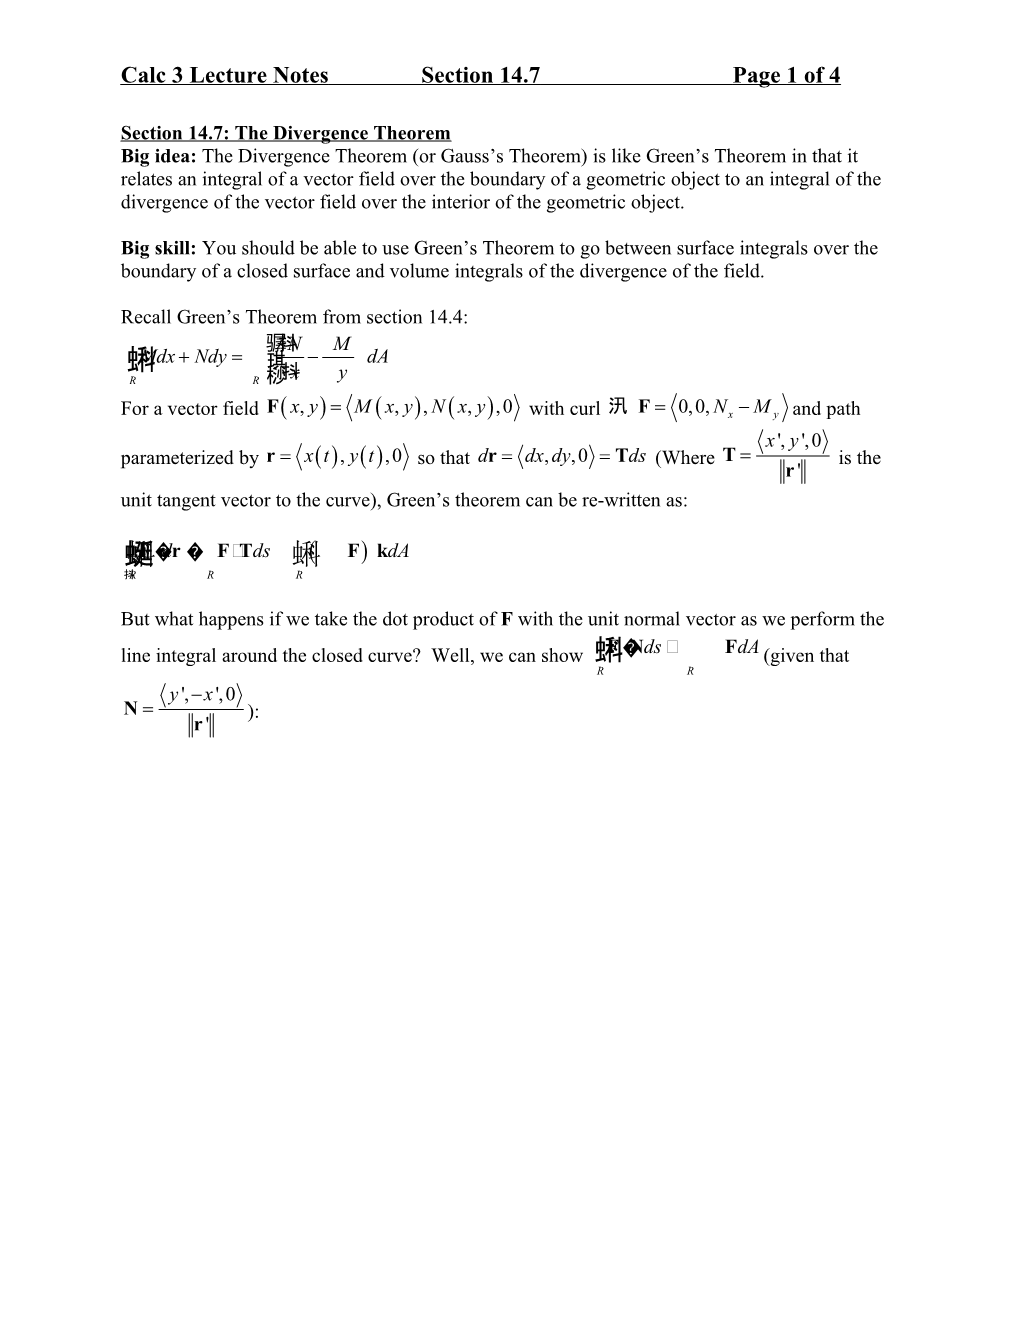 Calculus 3 Lecture Notes, Section 14.7